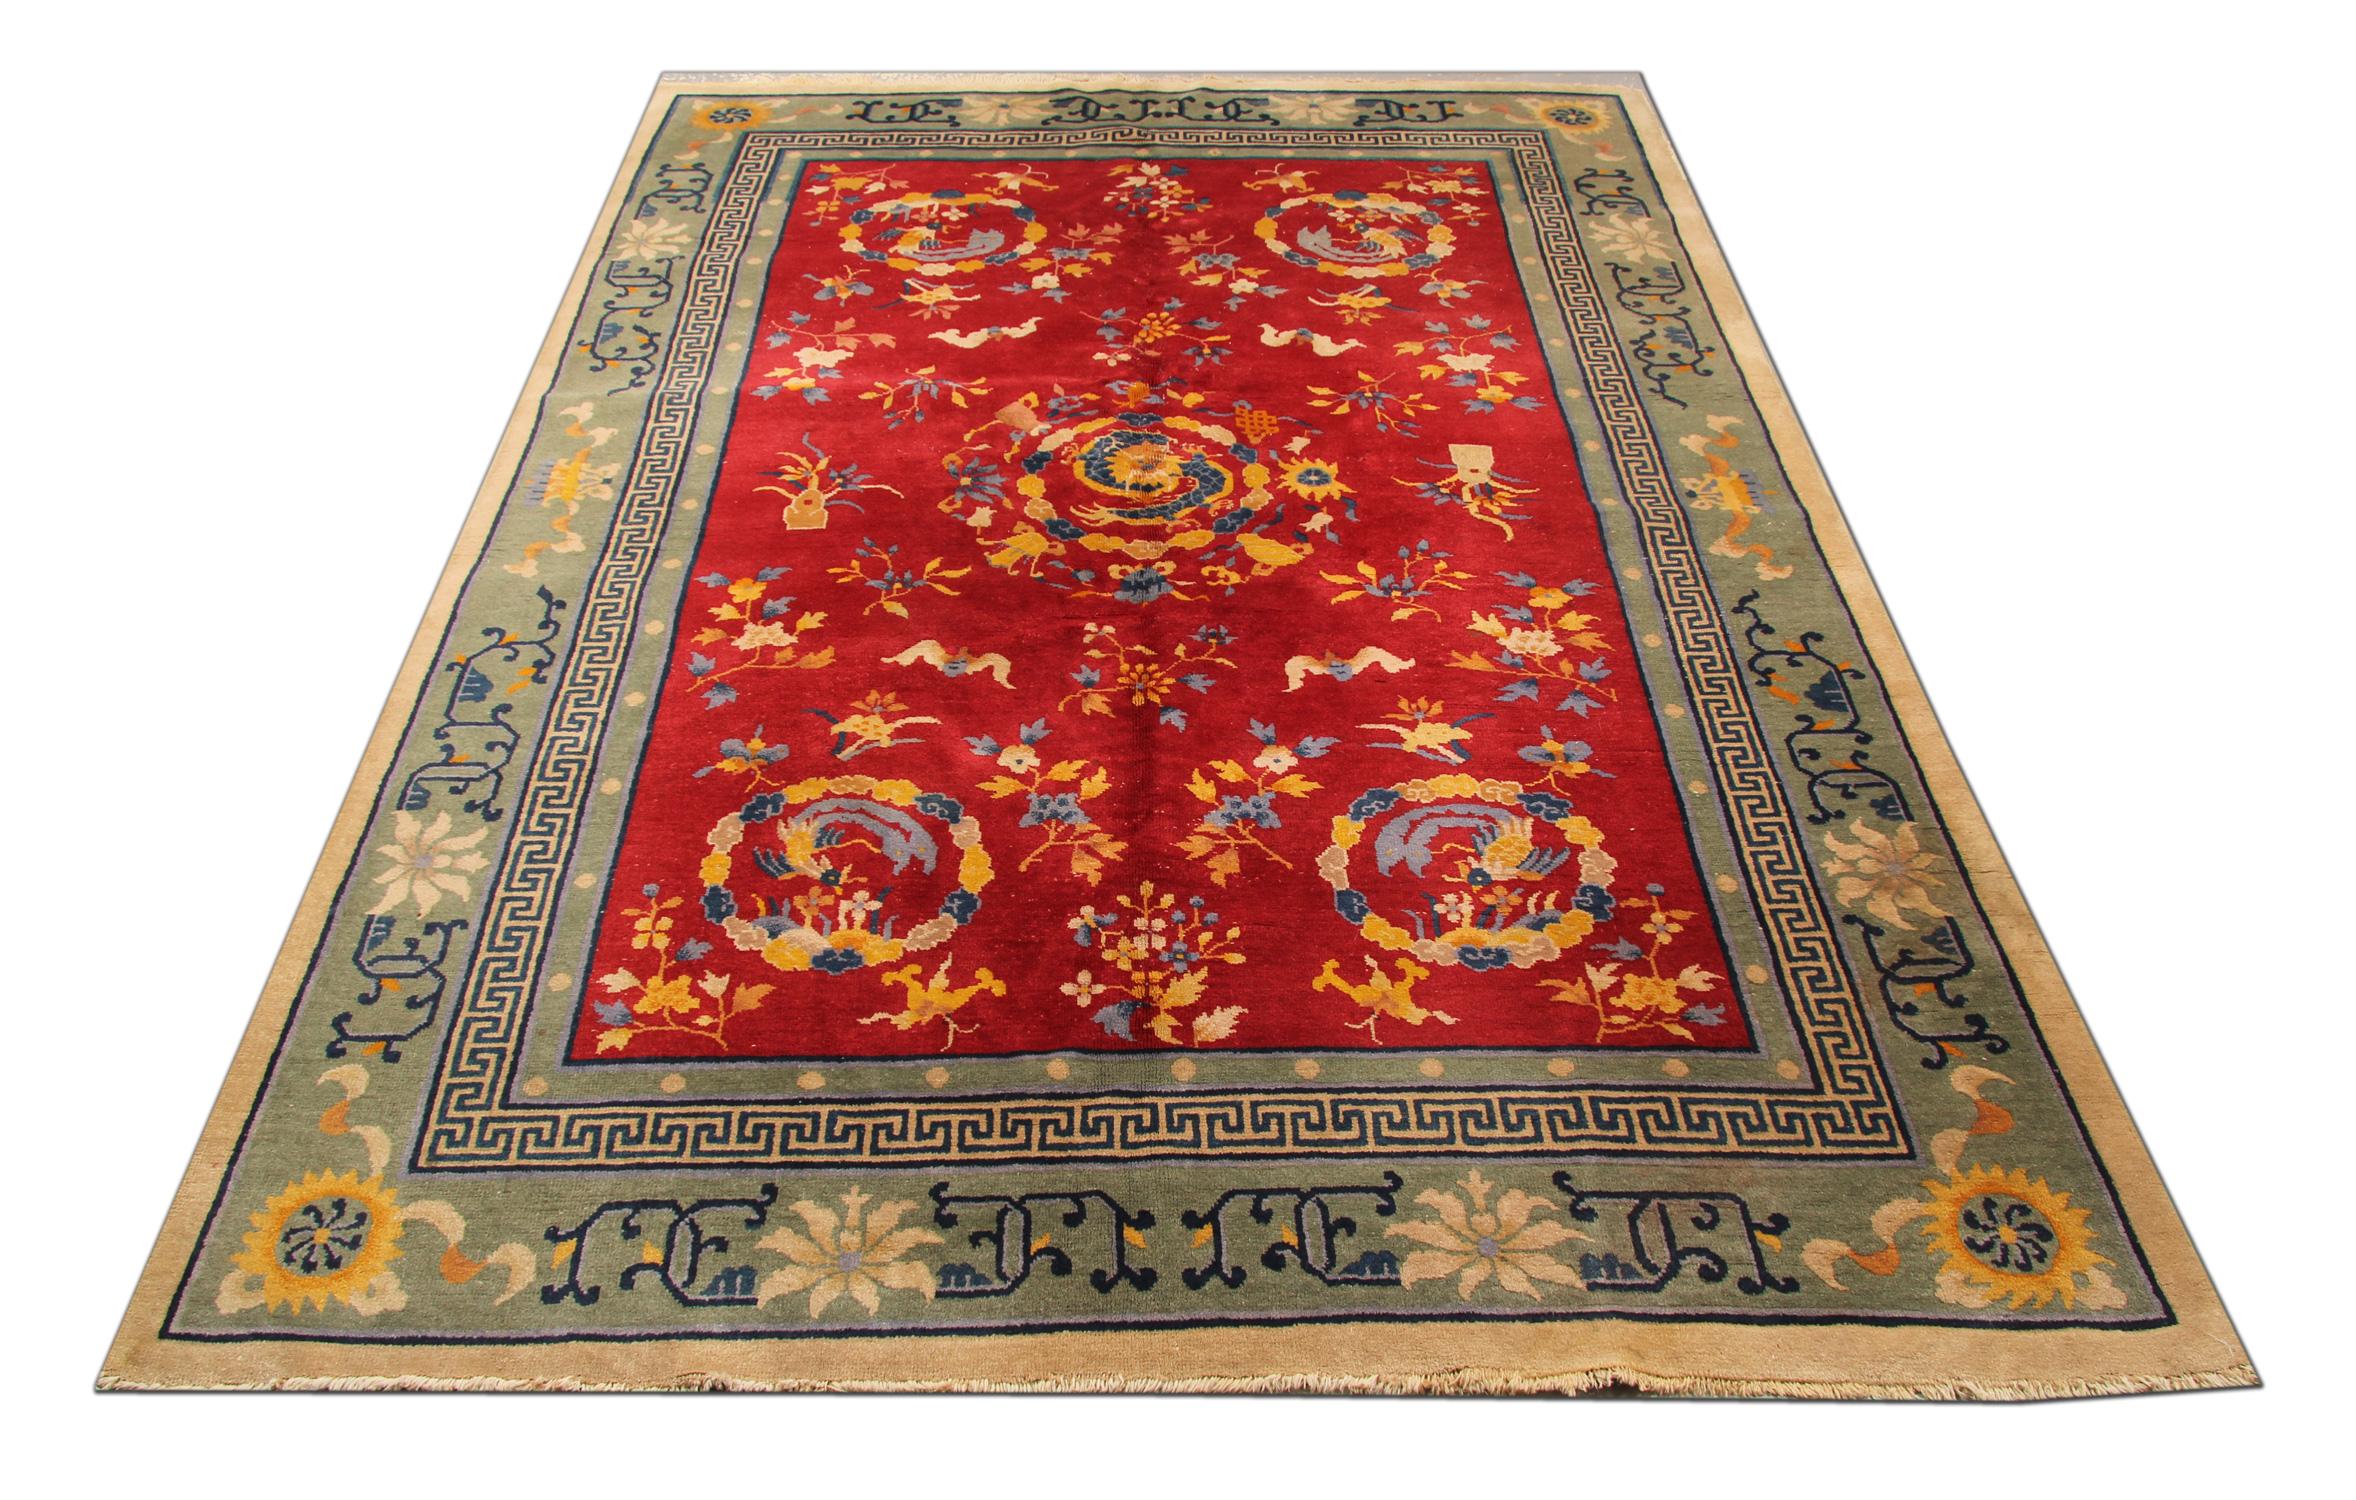 These handmade carpet wool rugs have airy and fiery elements grounded by splashing waves and jutting peaks, providing a sense of balance and tradition. Borrowing from the new and the old, this palatial Chinese carpet oriental rug showcases a formal